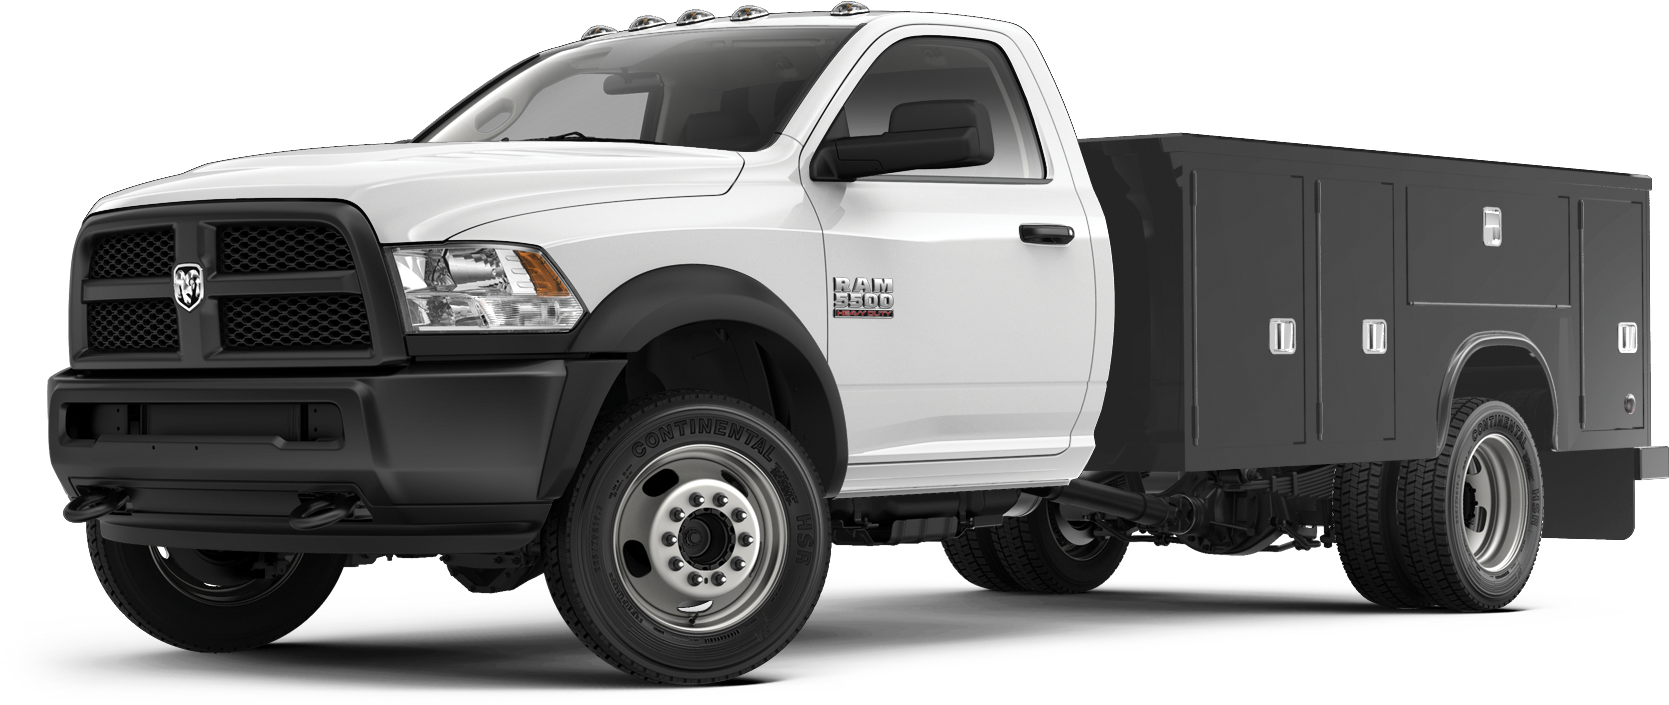 Pickup Truck Png Image - Png Truck Image Hd (1920x1080), Png Download